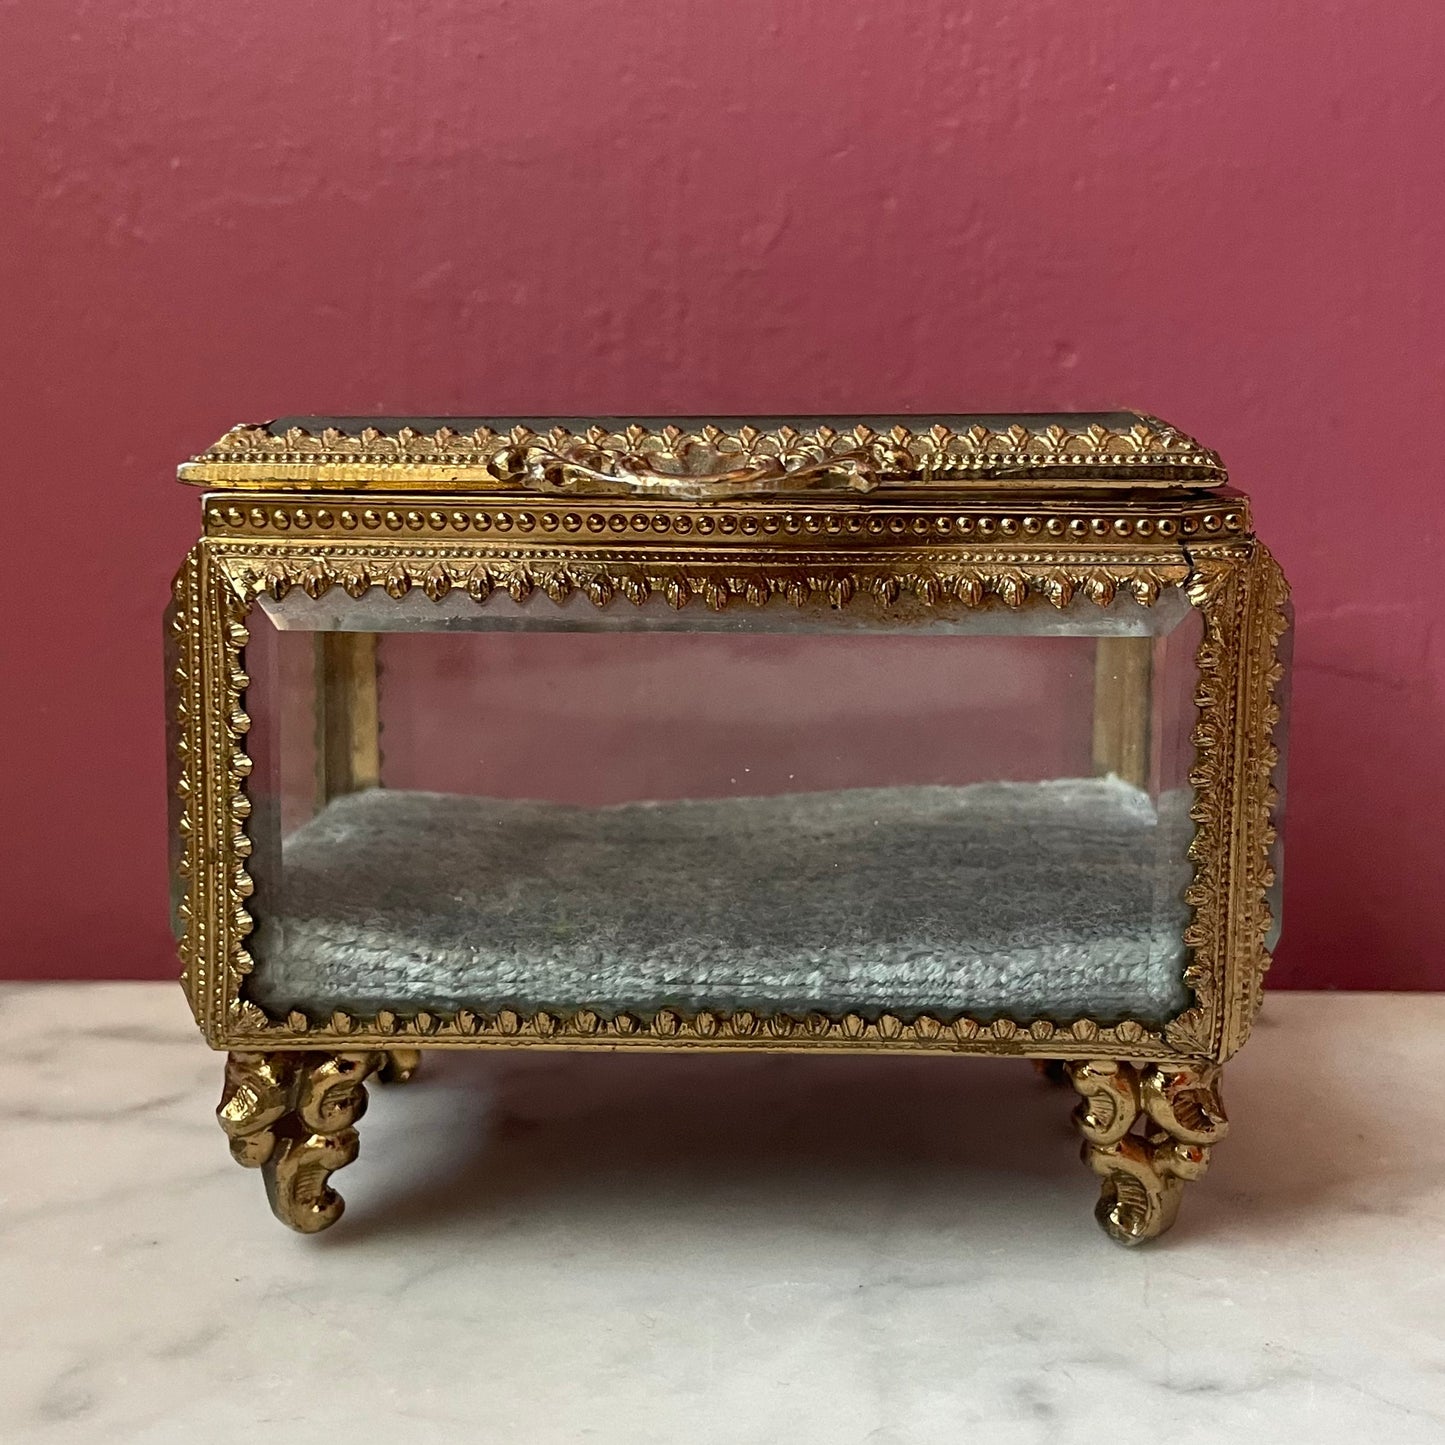 Victorian Revival Bevelled Glass Jewelry Box